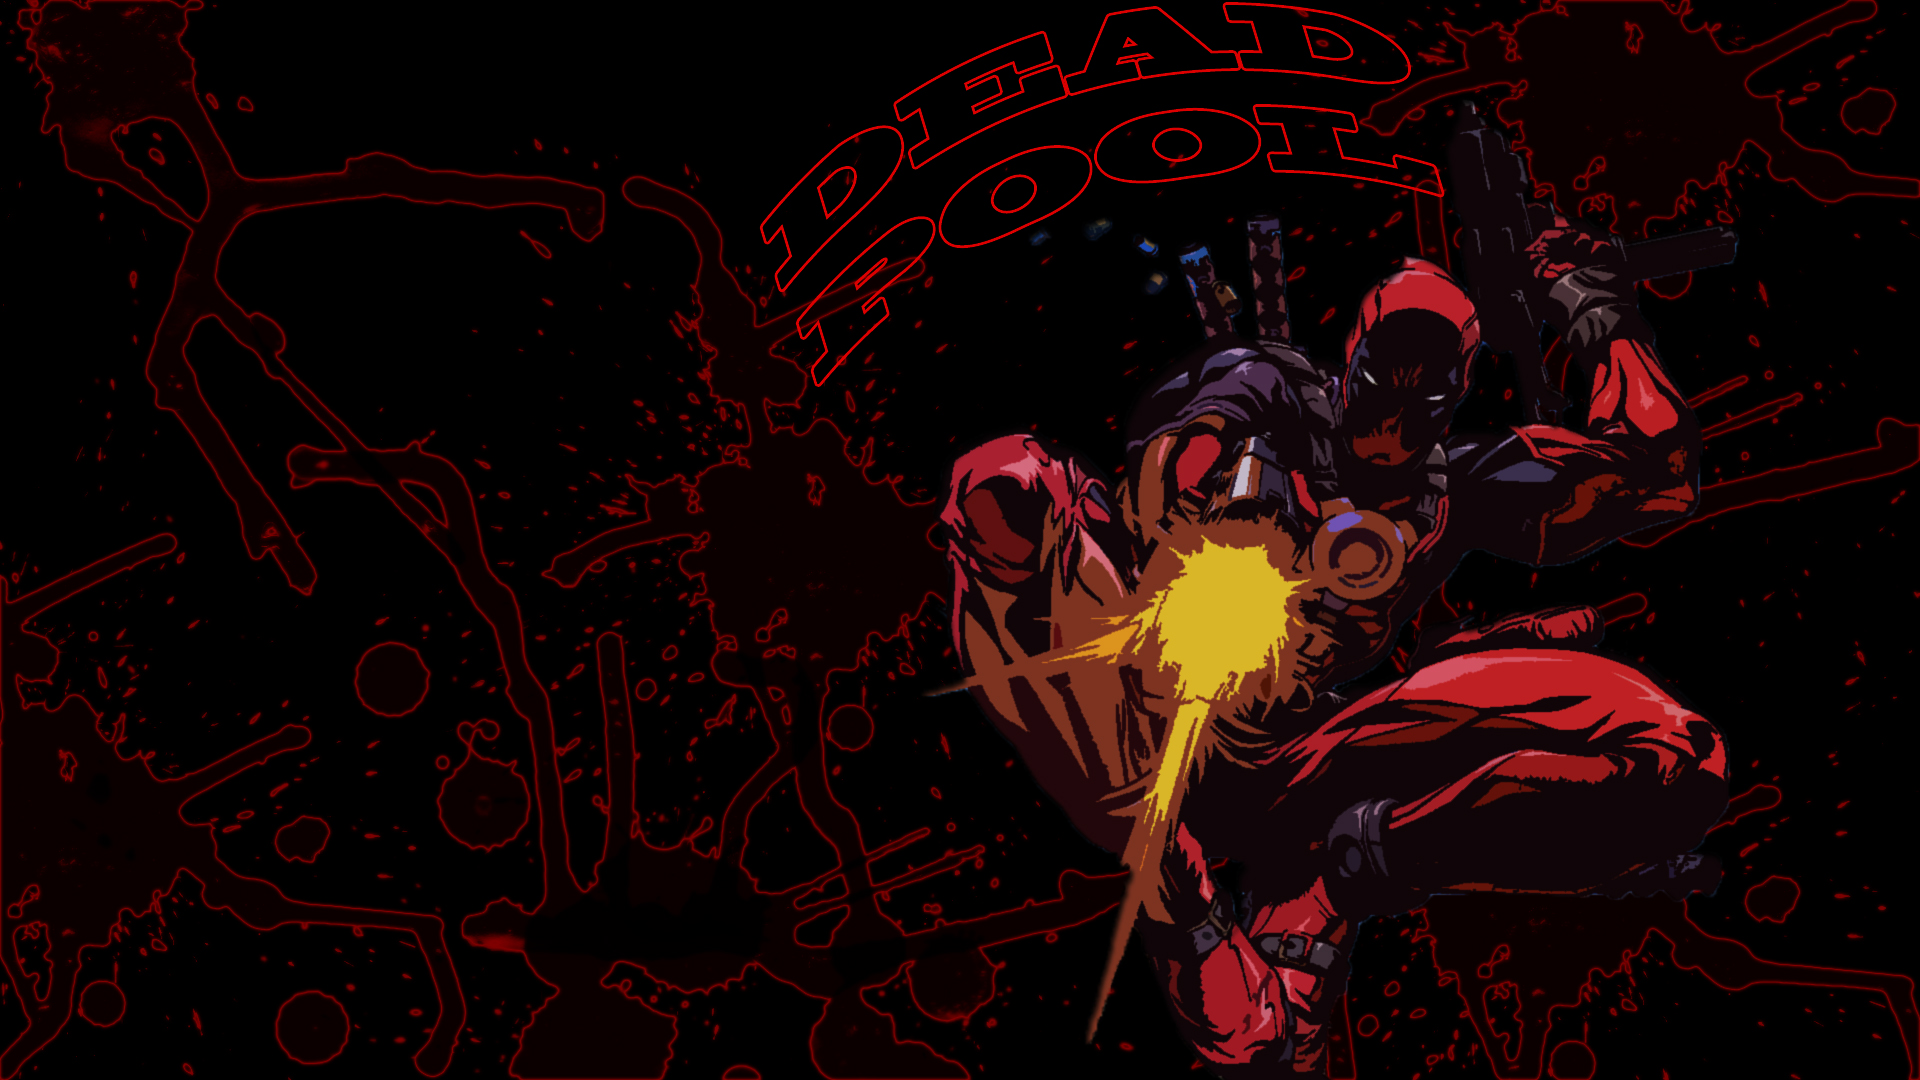 Free Download Wallpapers Cool Oldirrtydoogz Deadpool Whipped Couple Wallpaper 19x1080 For Your Desktop Mobile Tablet Explore 44 Cool Deadpool Wallpapers Deadpool Wallpaper For The Computer Deadpool Logo Wallpaper